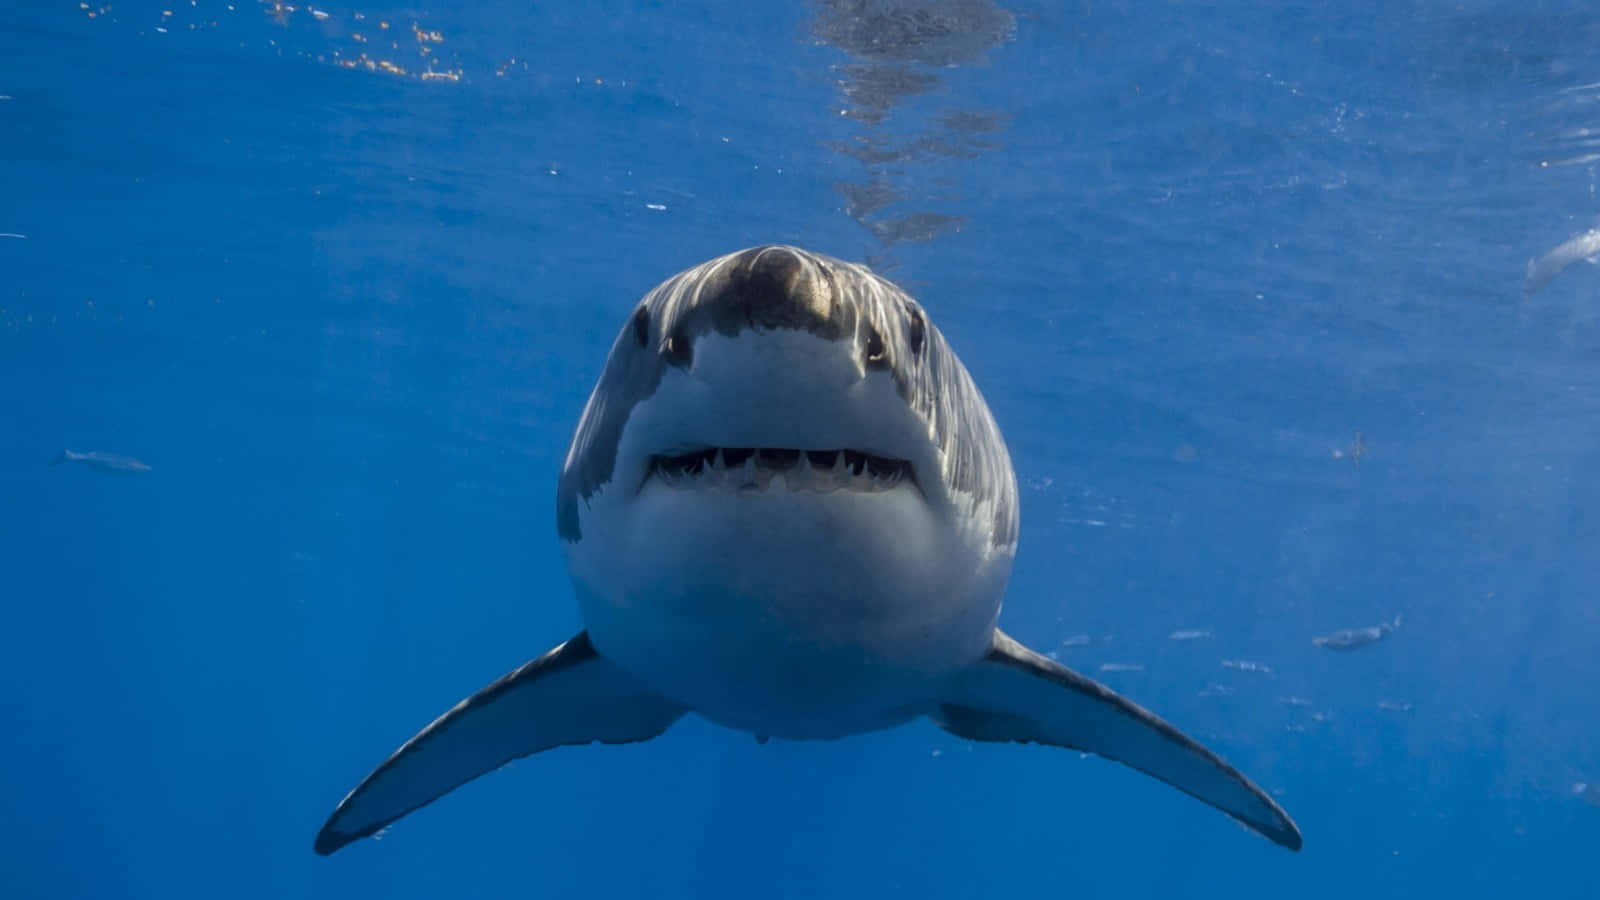 The Majestic Great White Shark